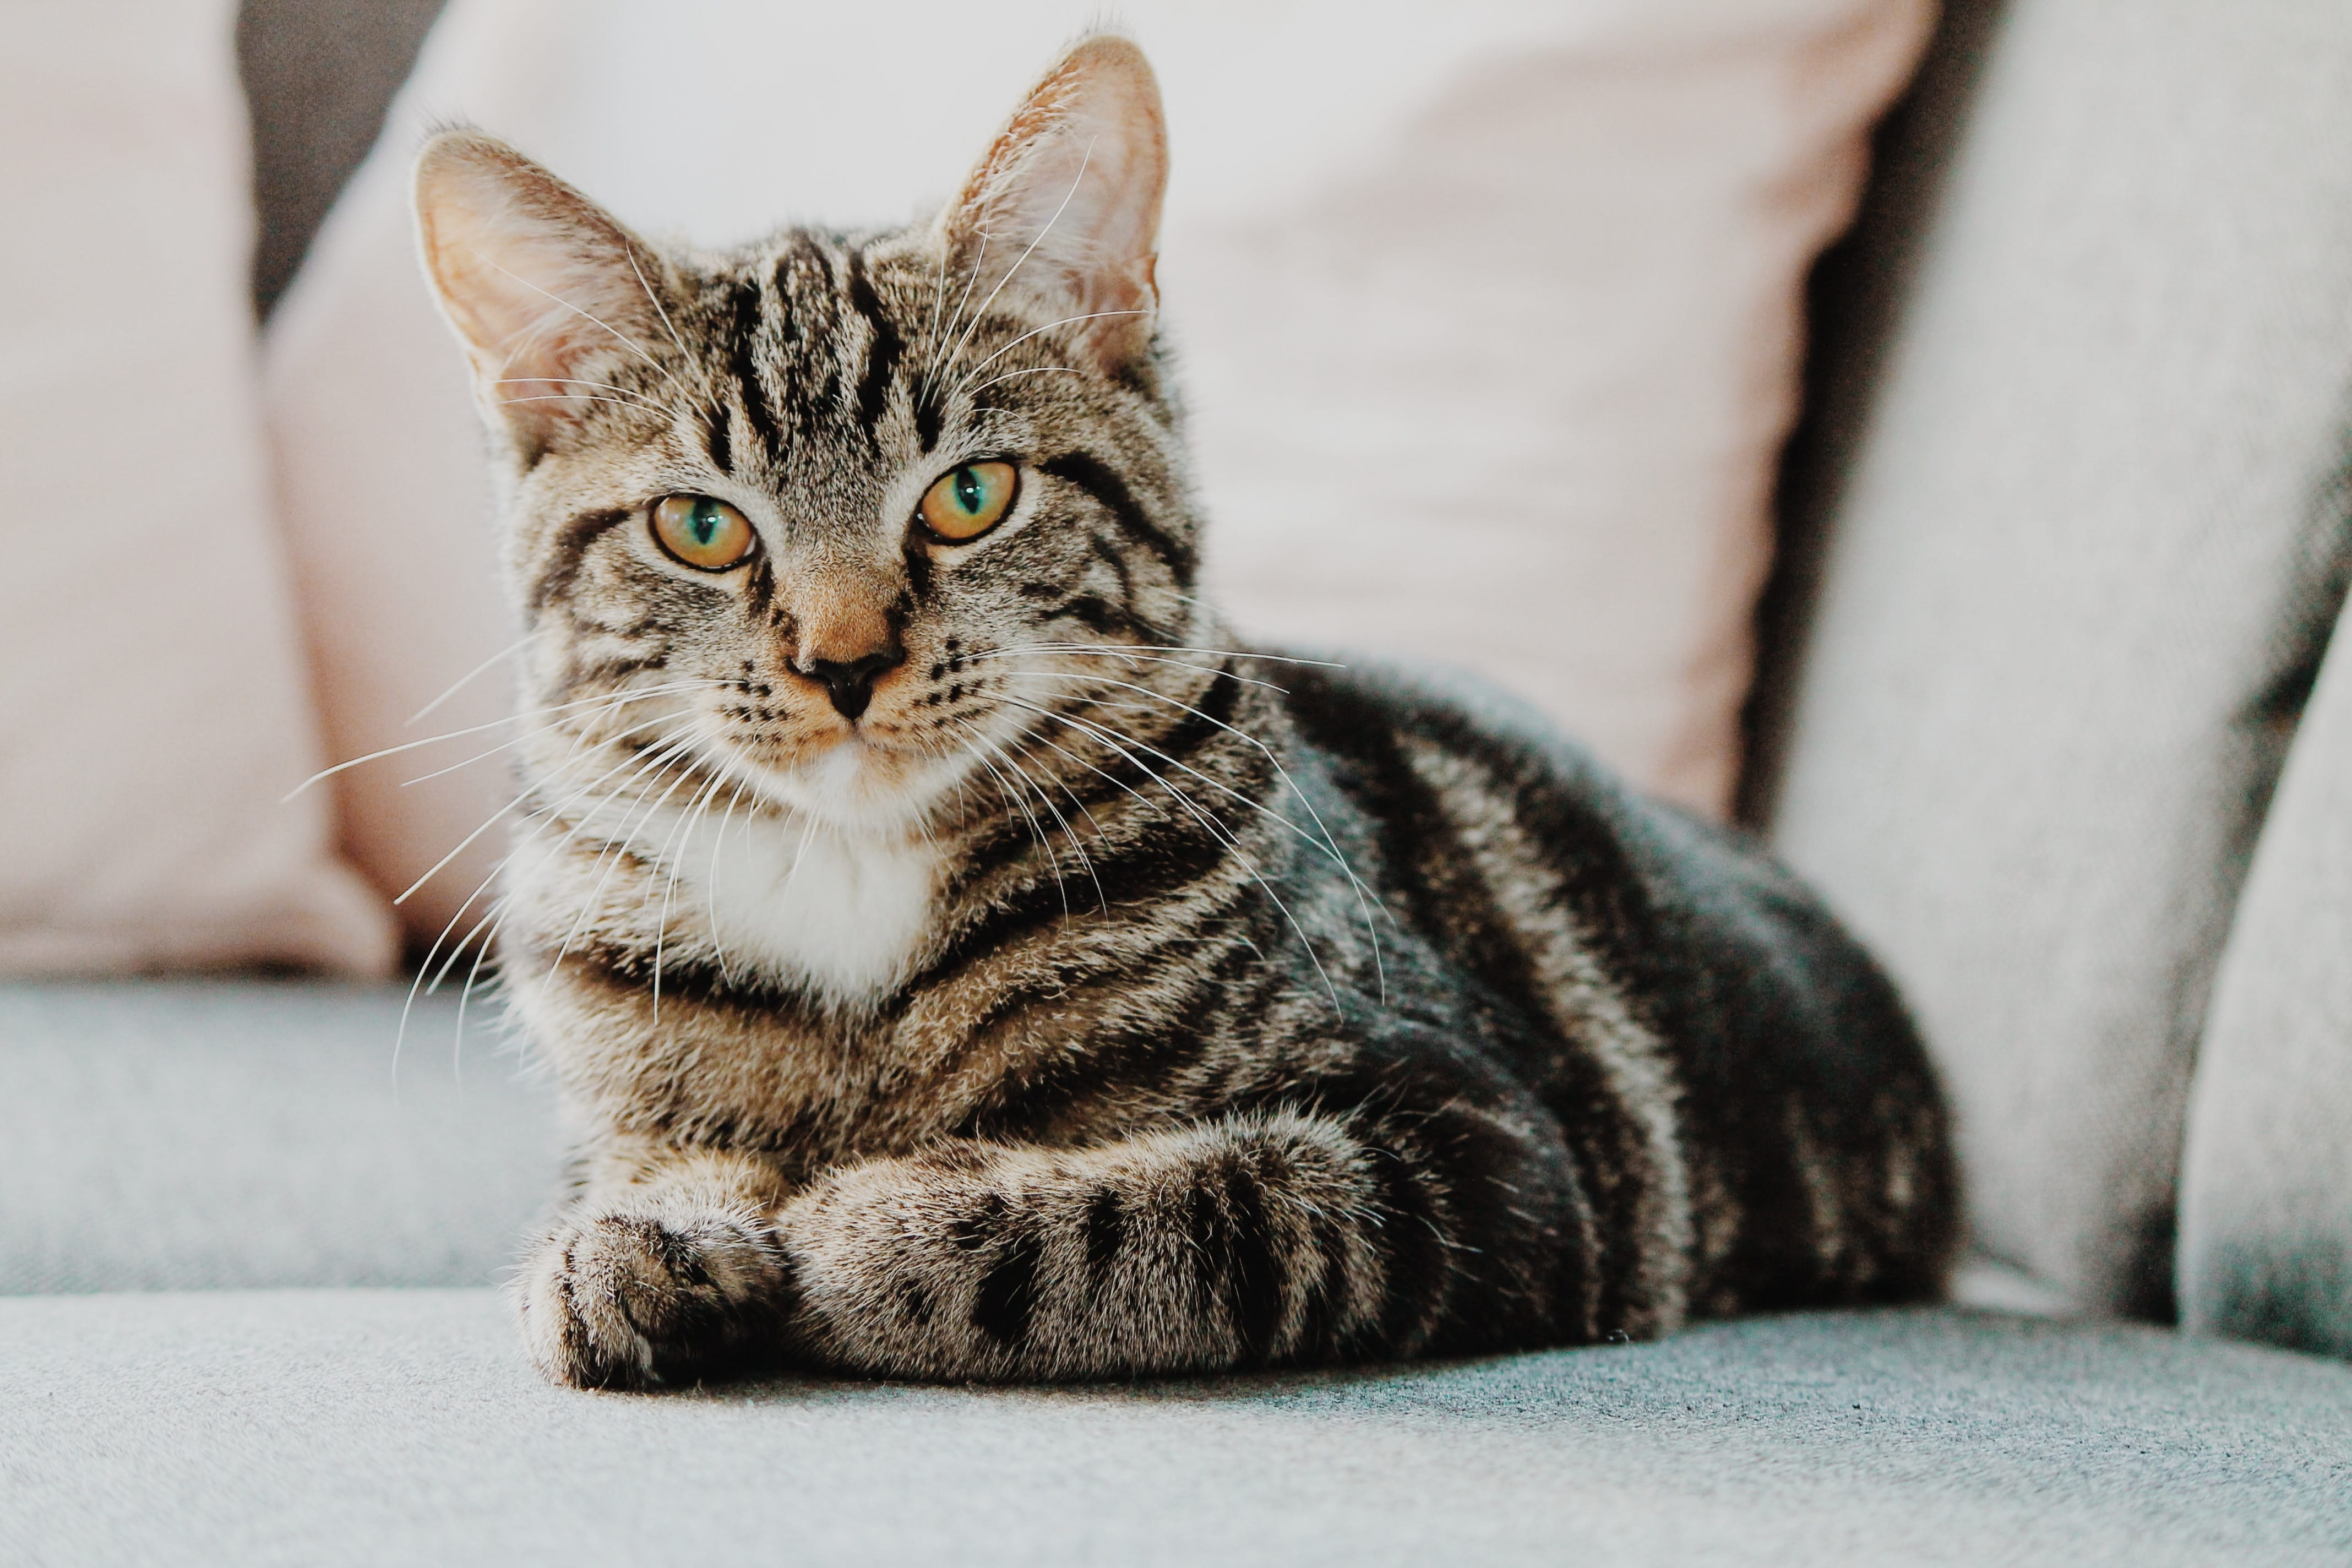 Nova Scotia Makes History by Banning Cat Declawing and Other Mutilations